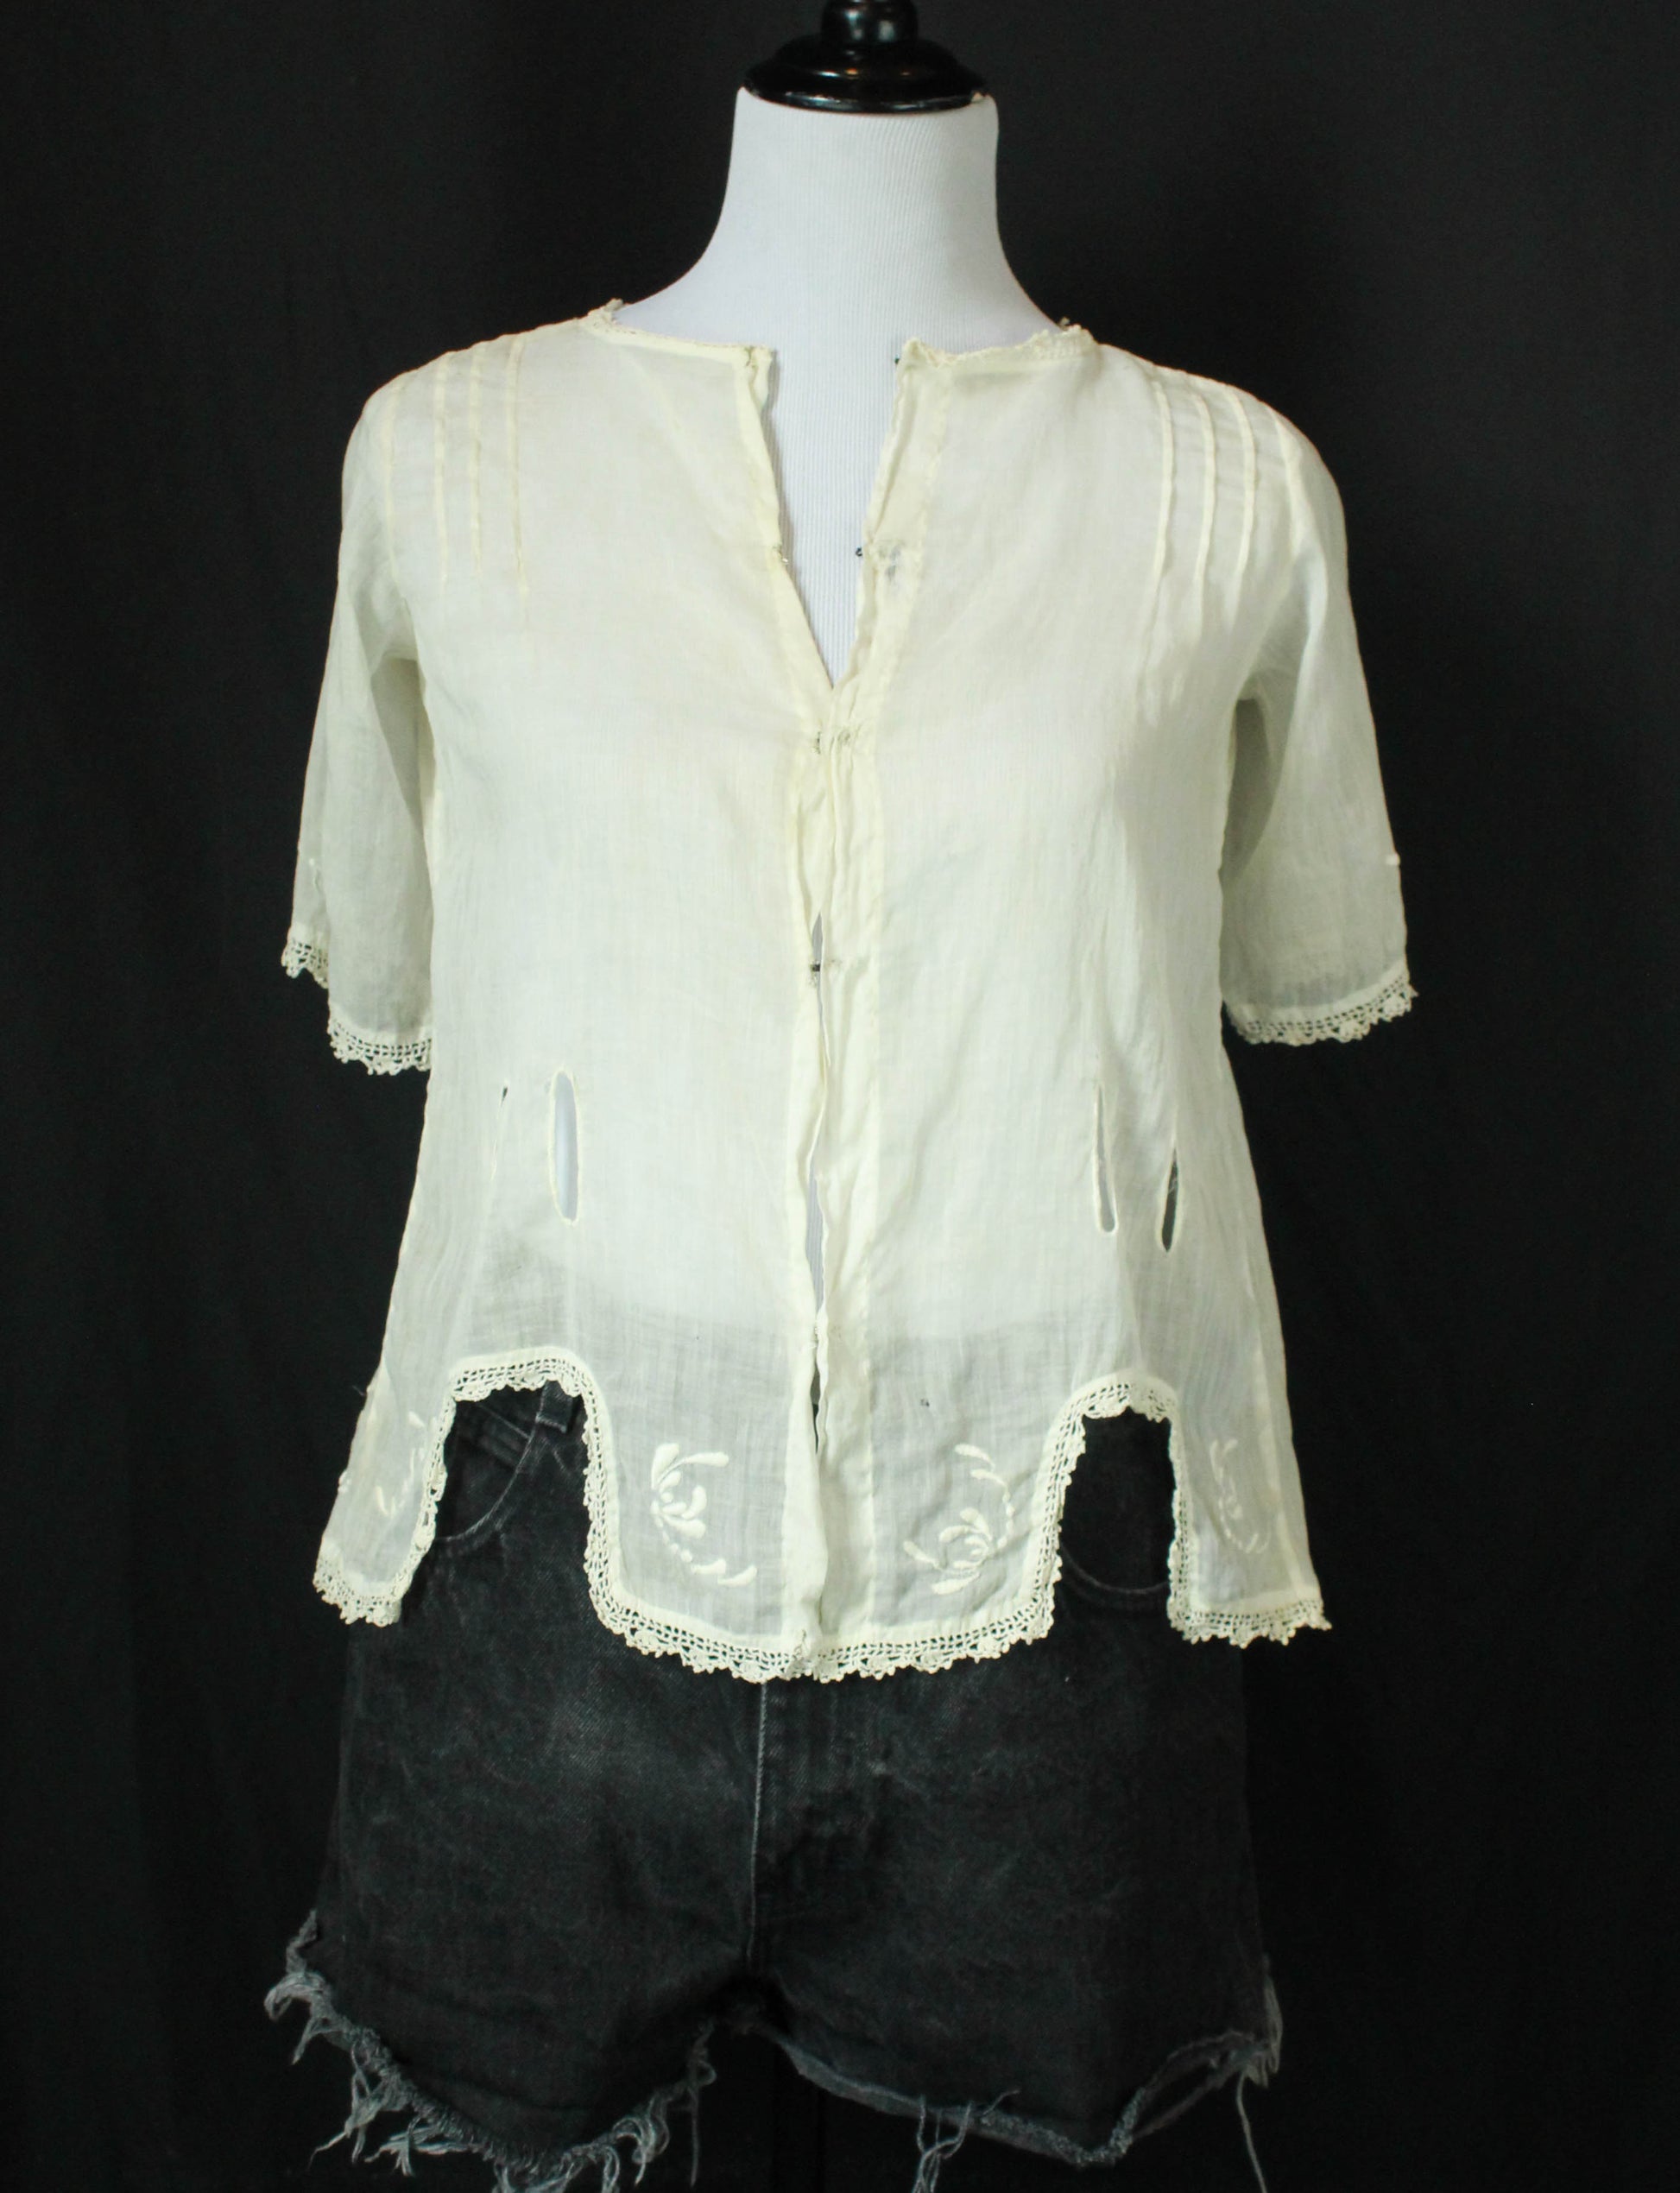 Women's Vintage Edwardian Sheer White Embroidered Blouse - Small